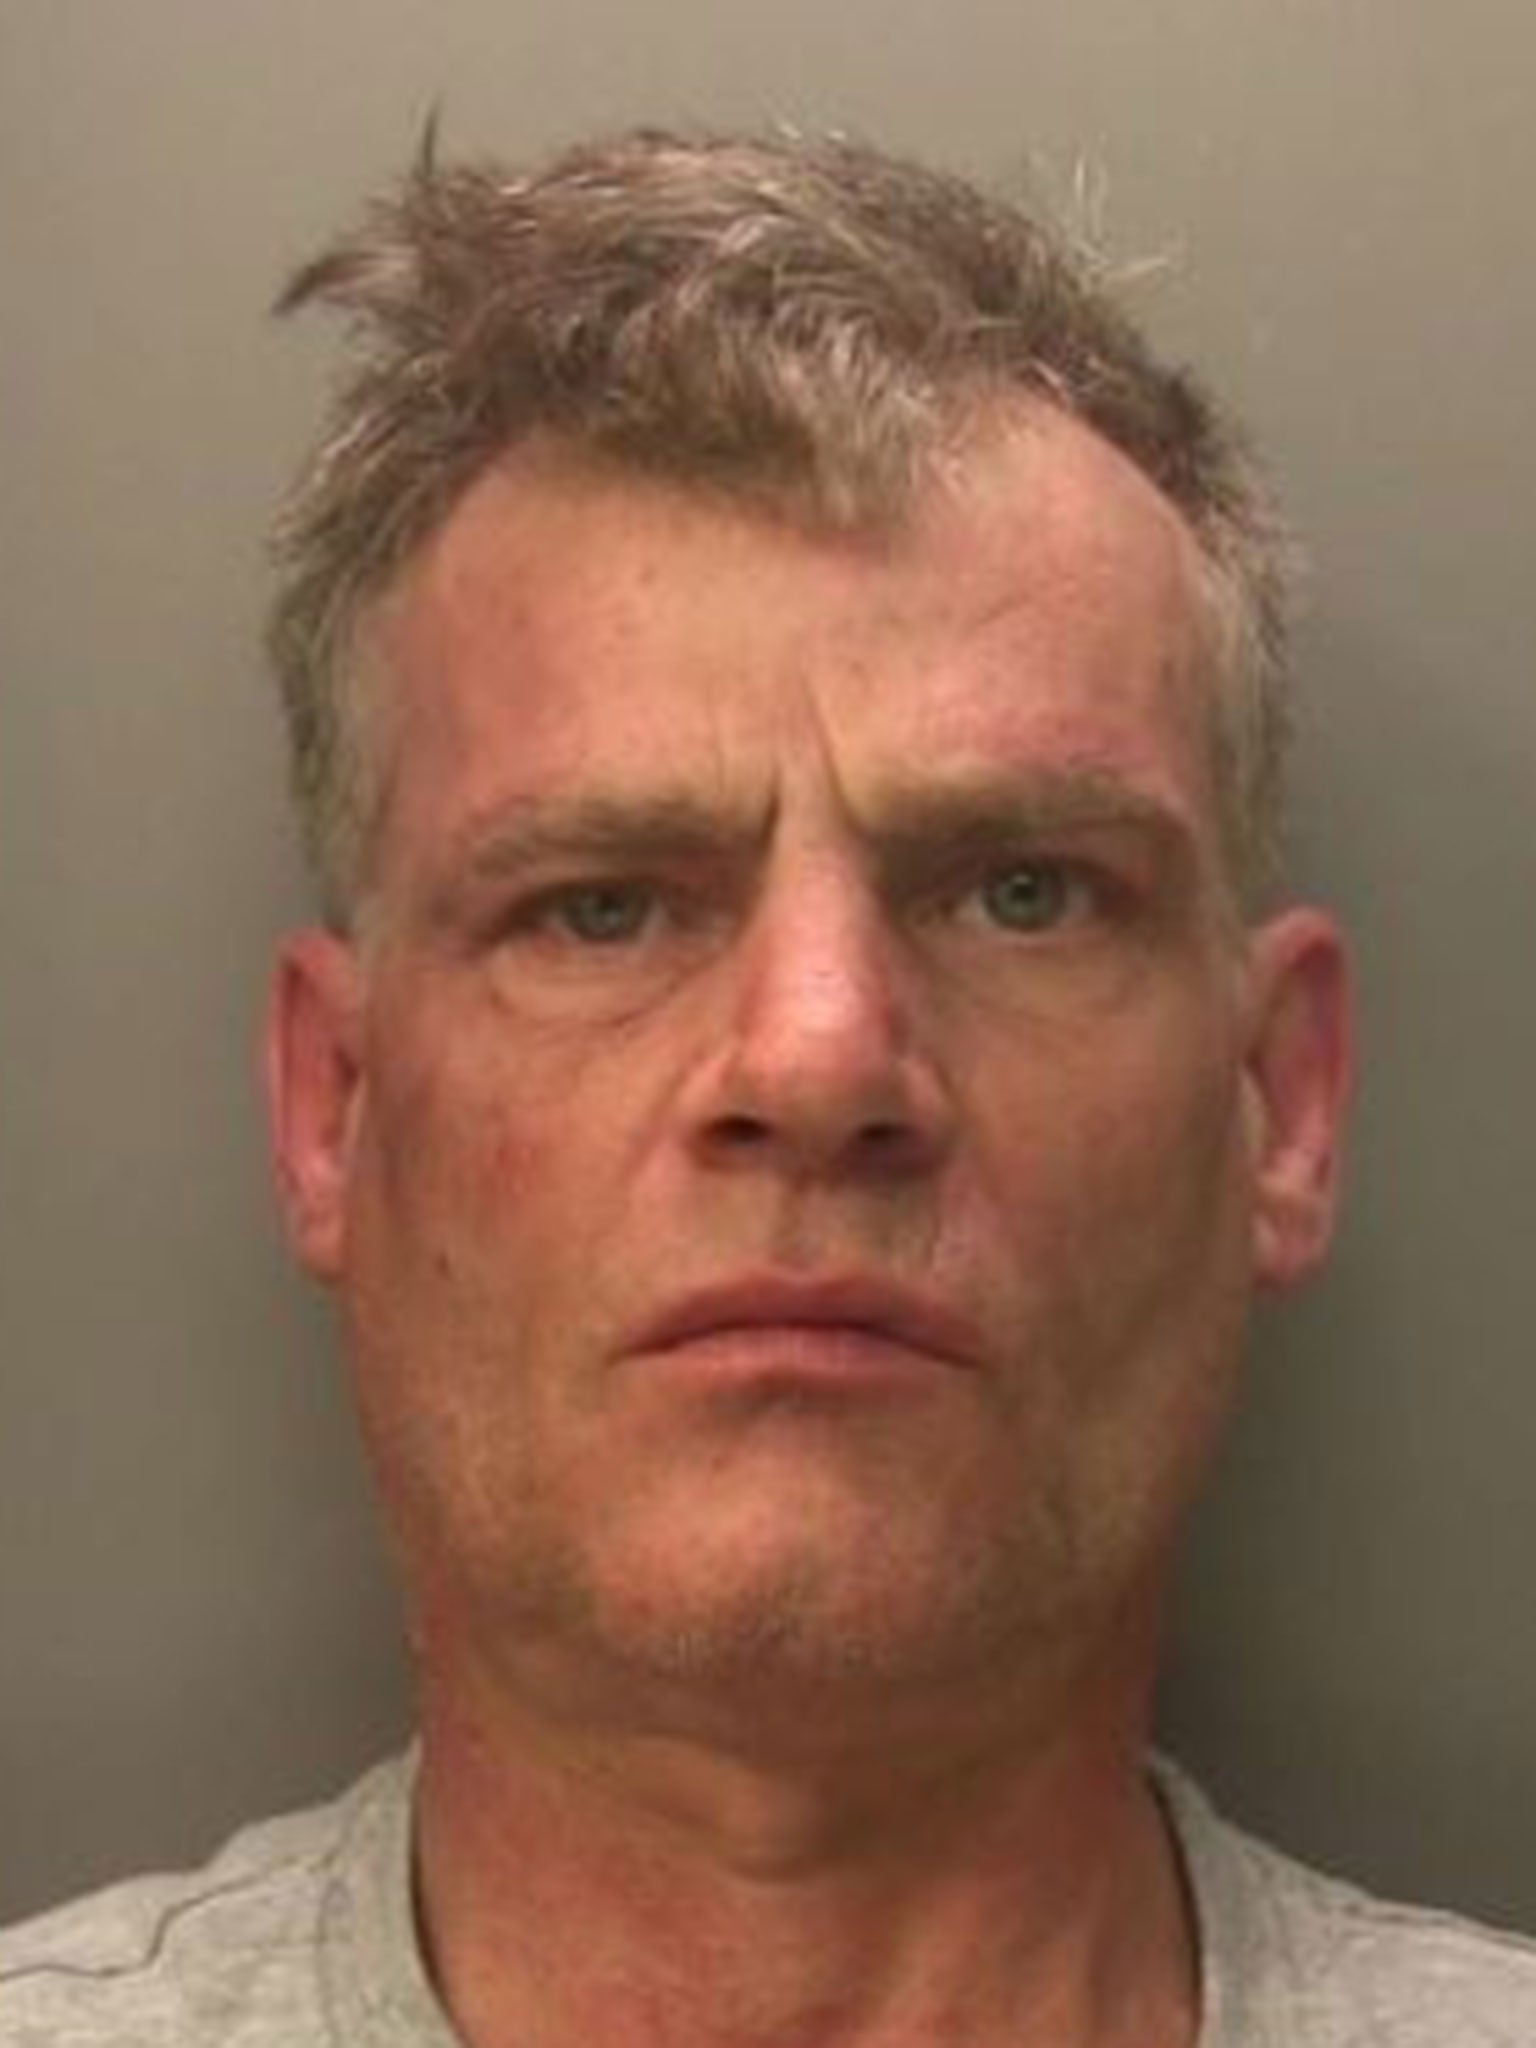 Vincent Fuller, 50, went on a rampage armed with a knife and baseball bat in the Surrey town of Stanwell on 16 March 2019